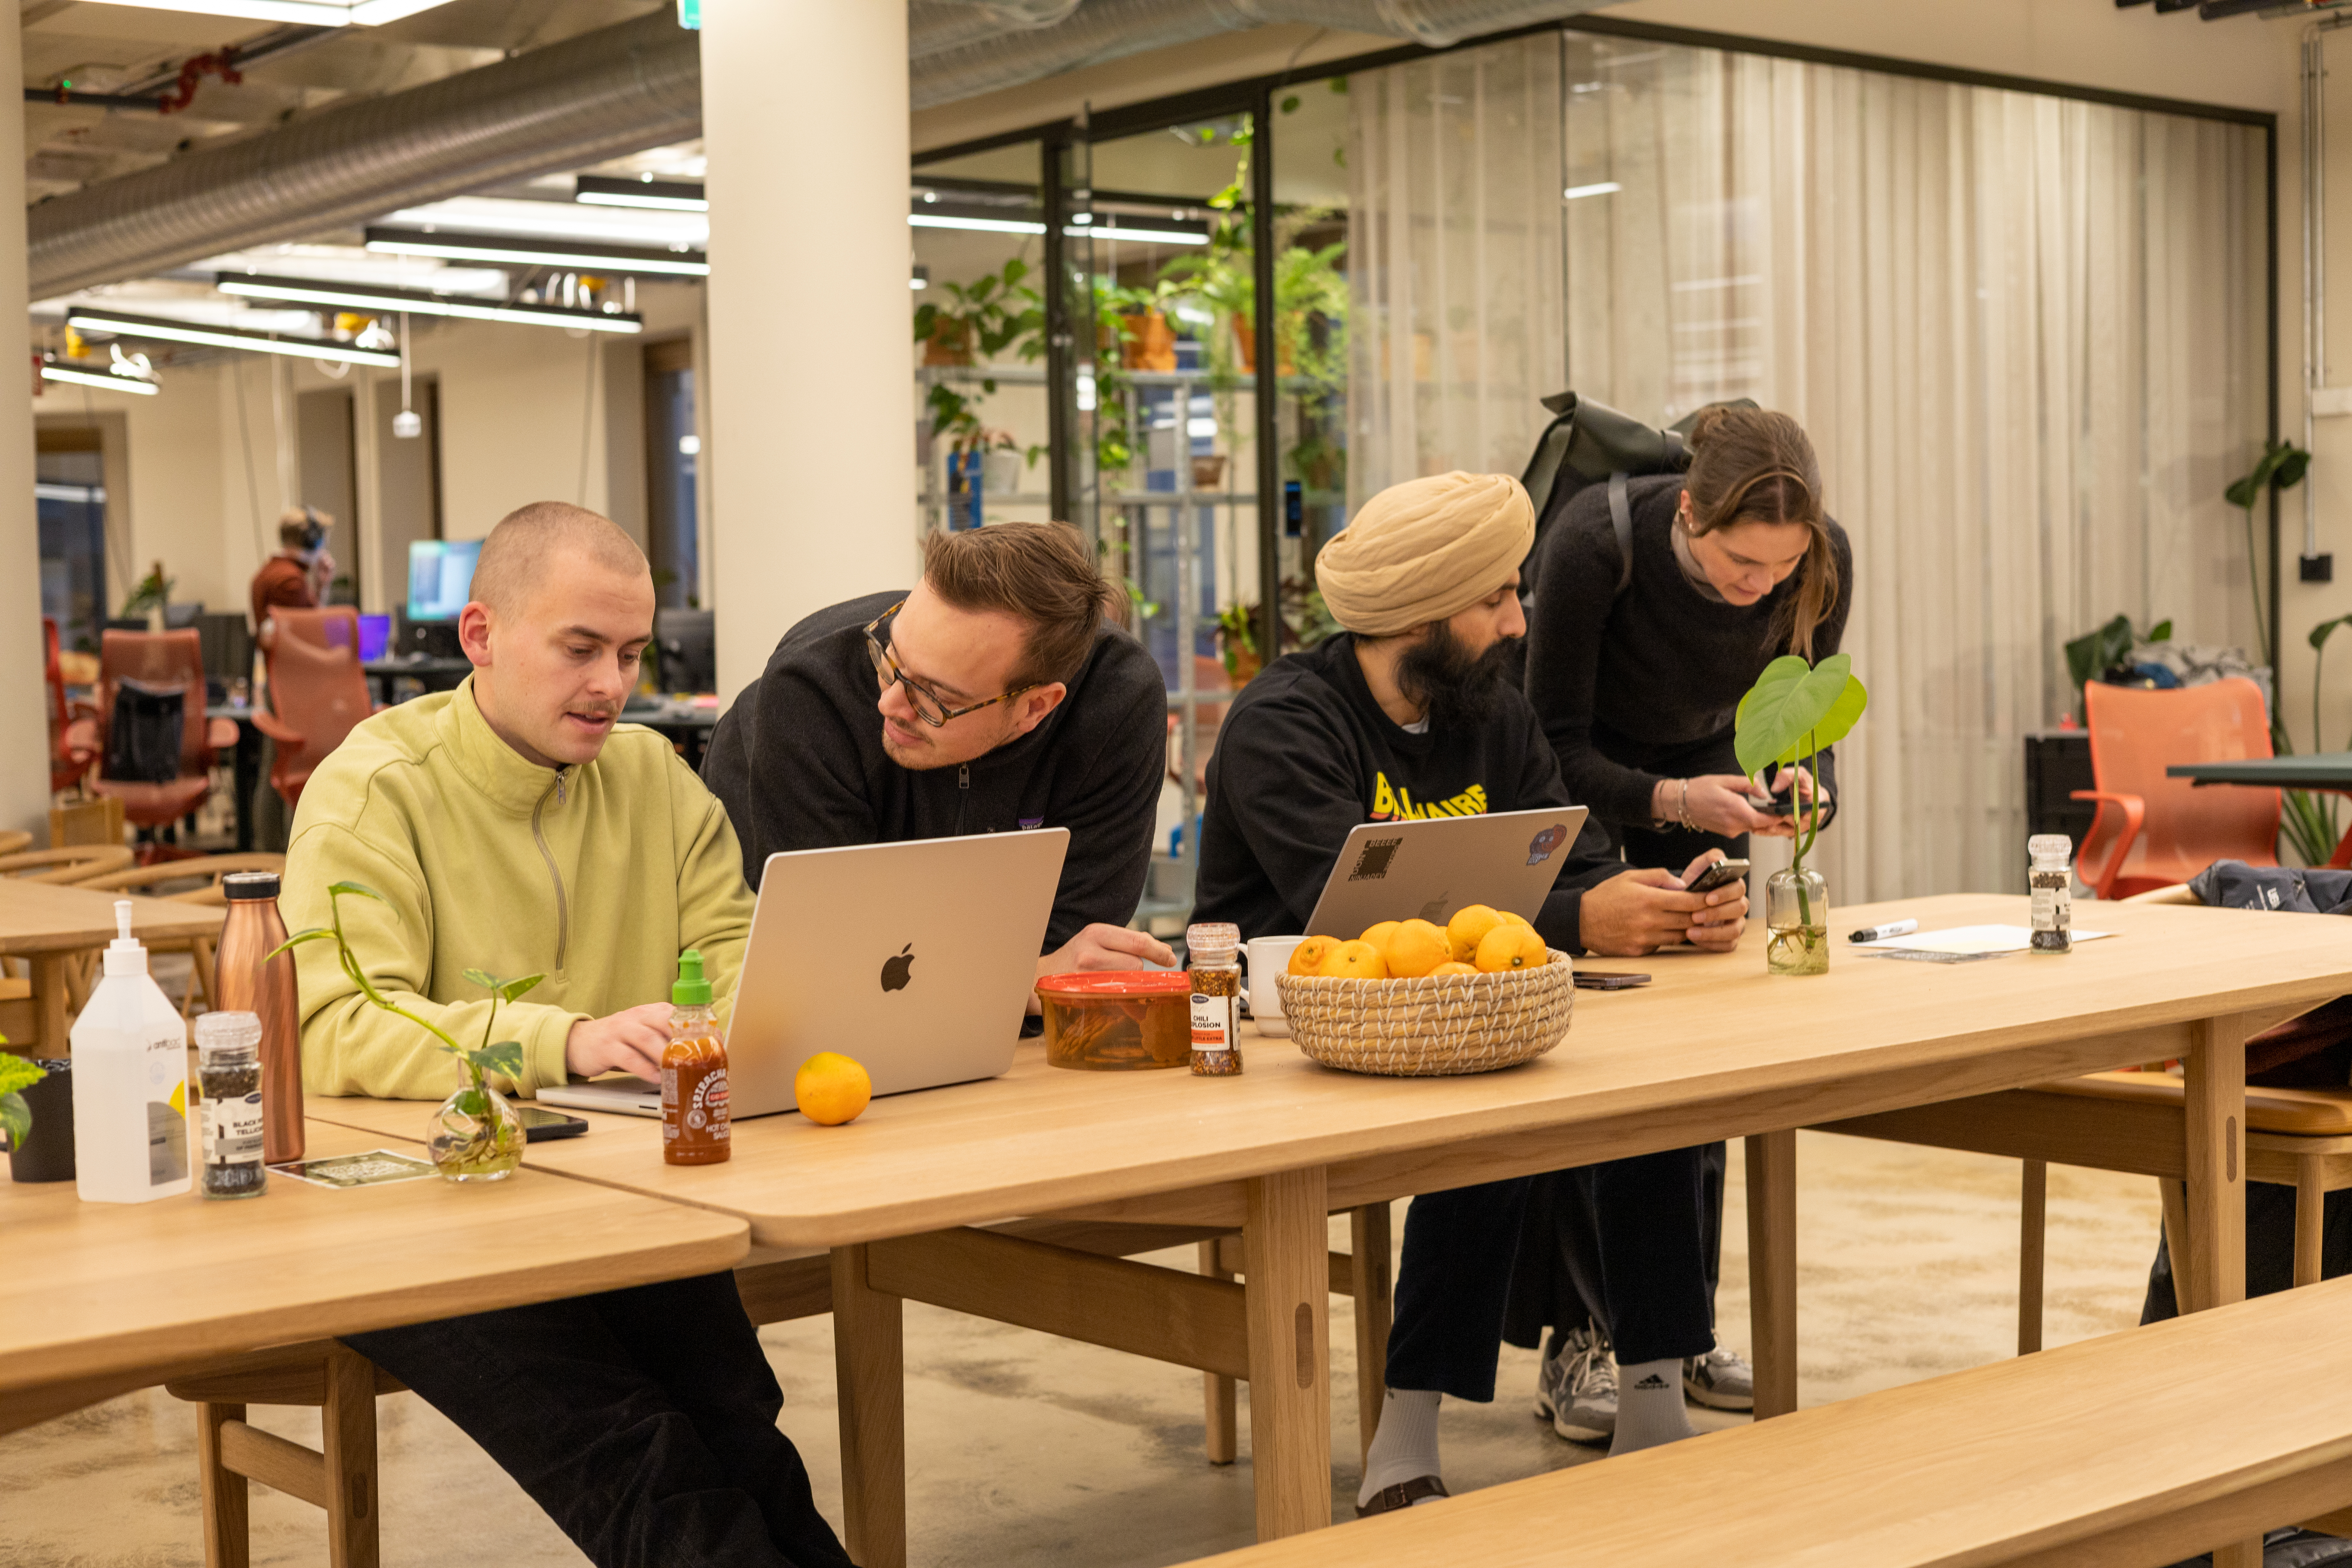 Image of four people talking and looking at screens